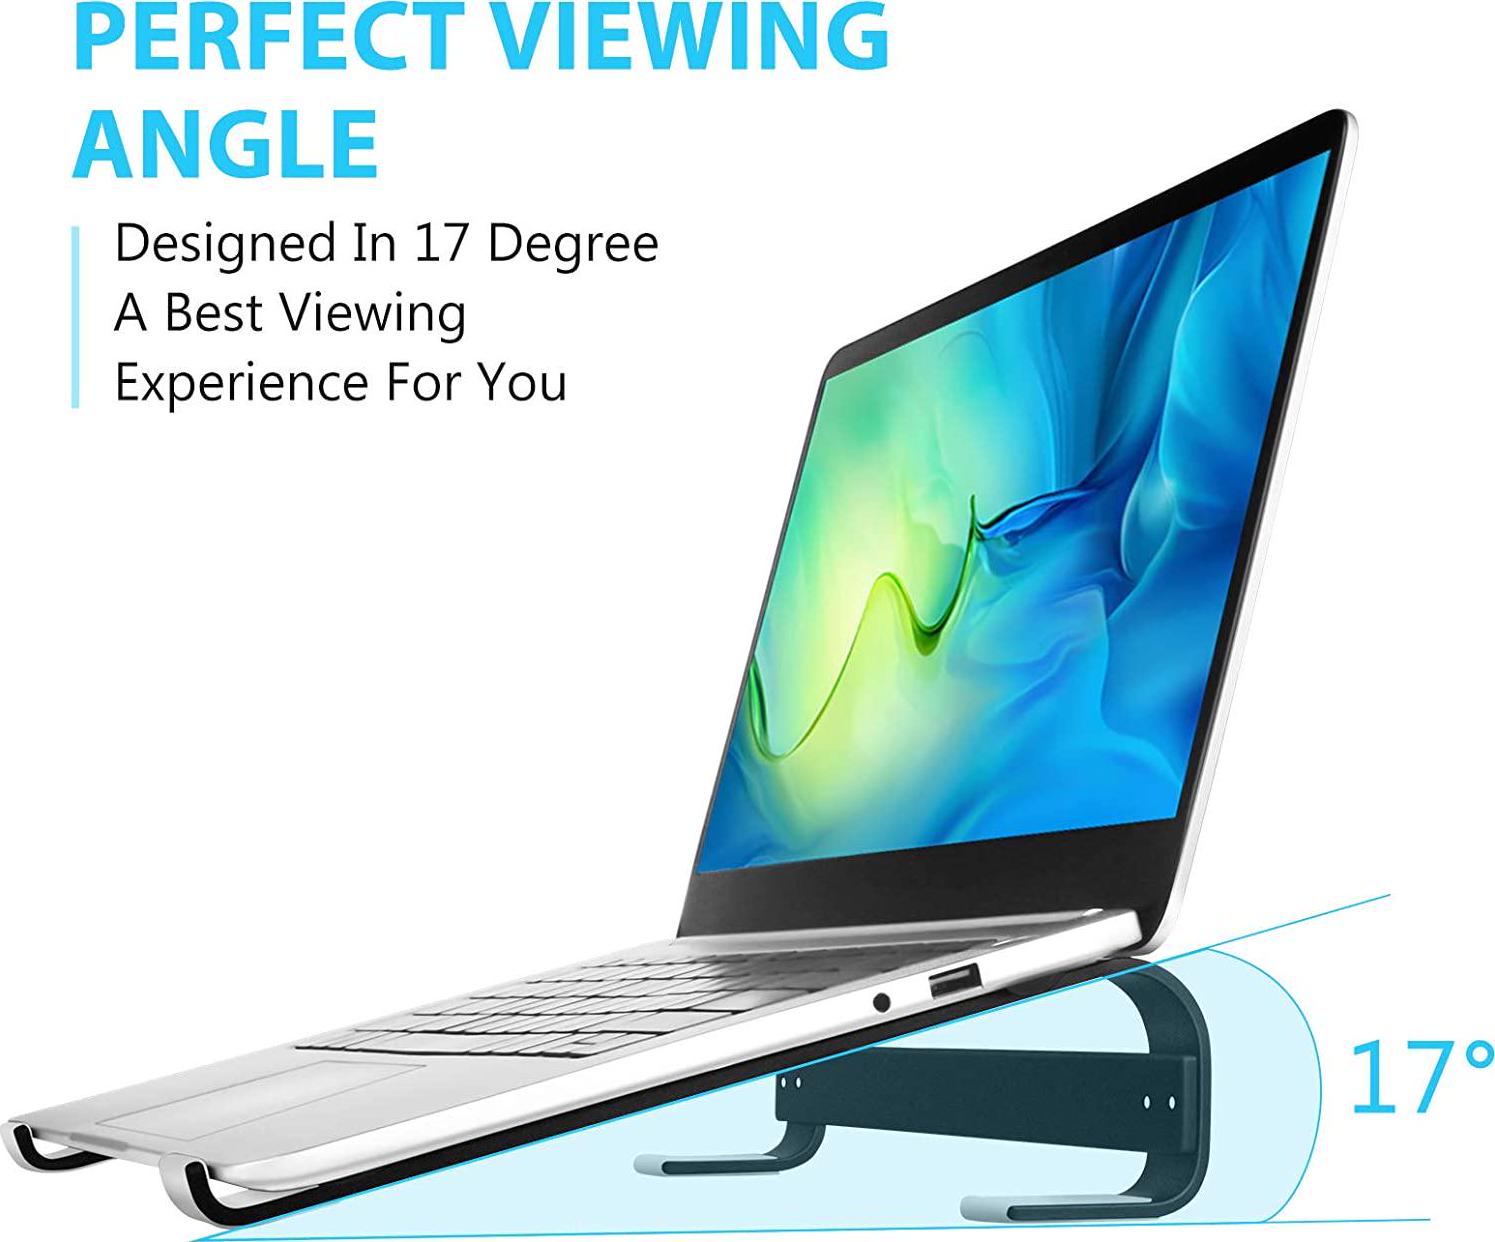 Answaily, Laptop Stand, Ergonomic Aluminum Non-Slip Computer Riser for Desk, Computer Stand, Tablet Stand, Ventilated Cooling Notebook Stand Mount for MacBook Air Pro, Lenovo, Dell, More 10-15.6 Laptops